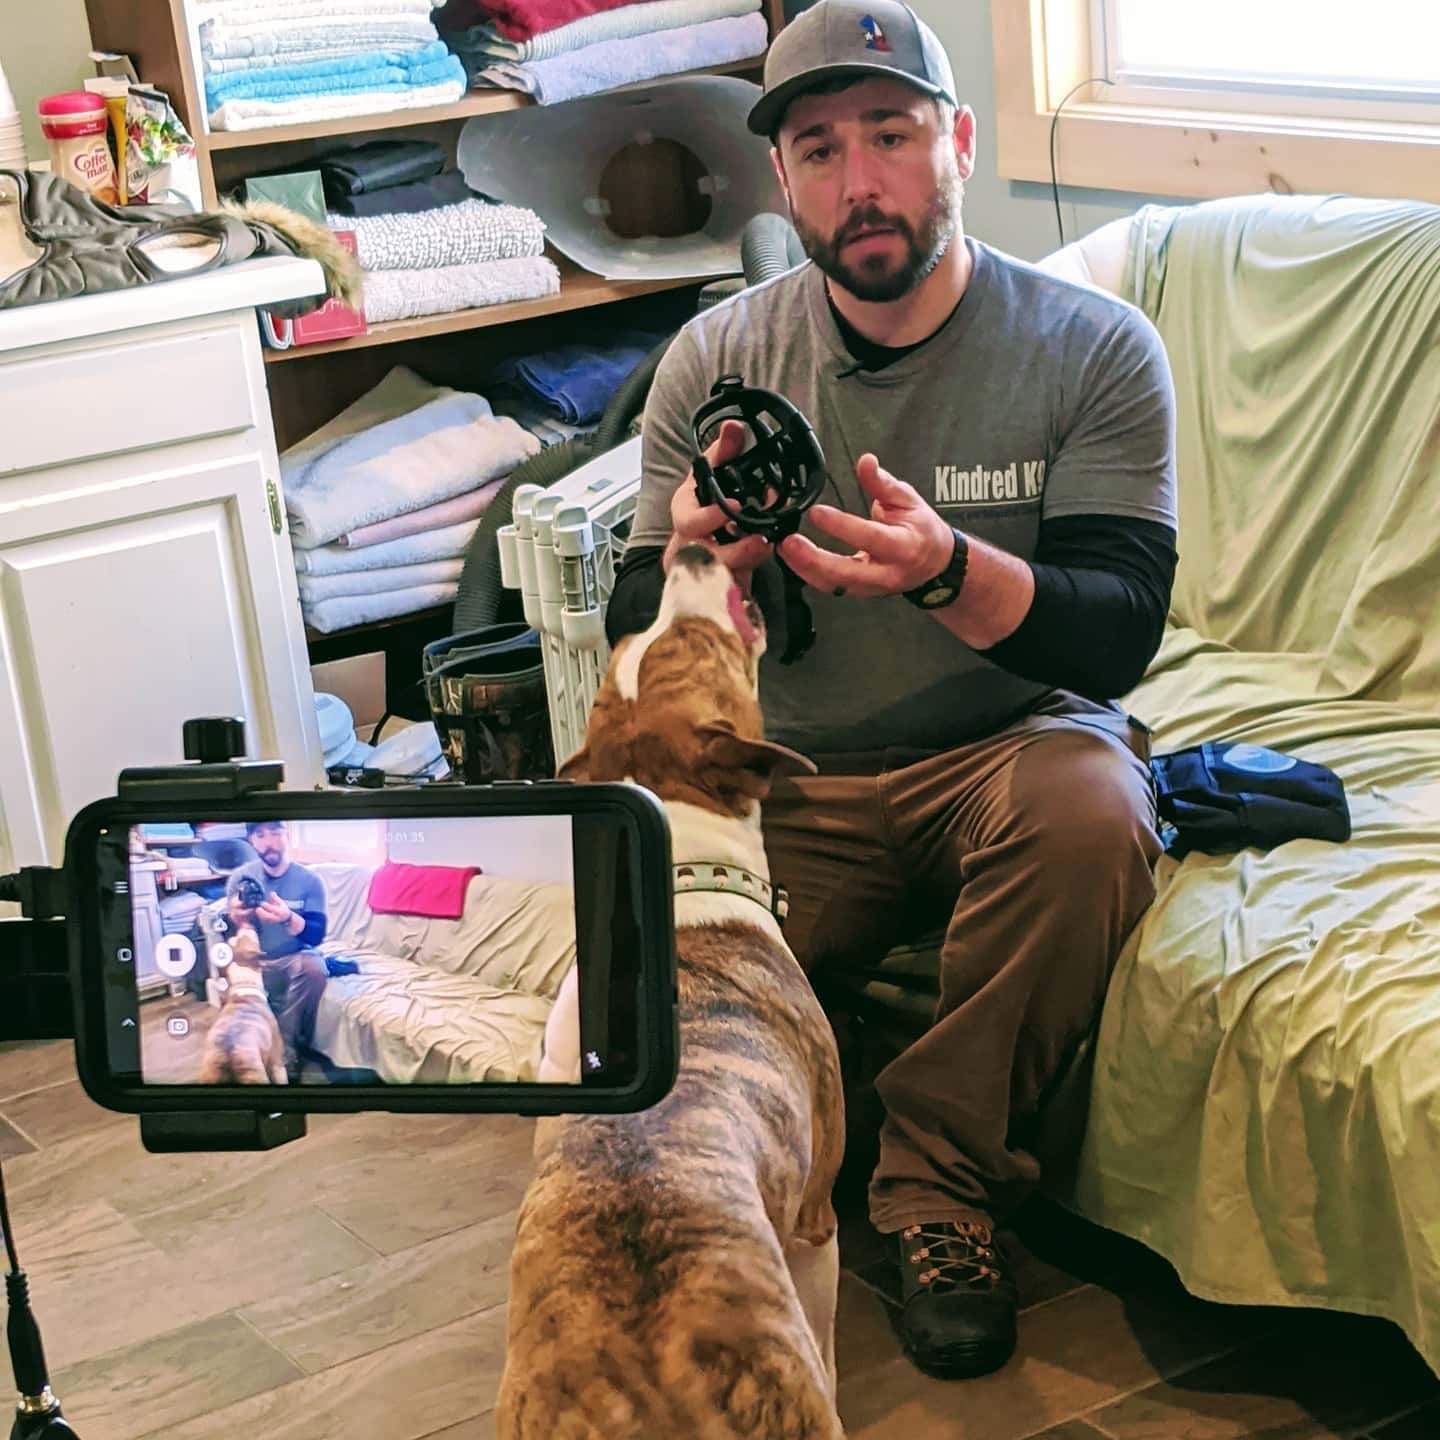 Jeff recording a video about putting muzzles of dogs